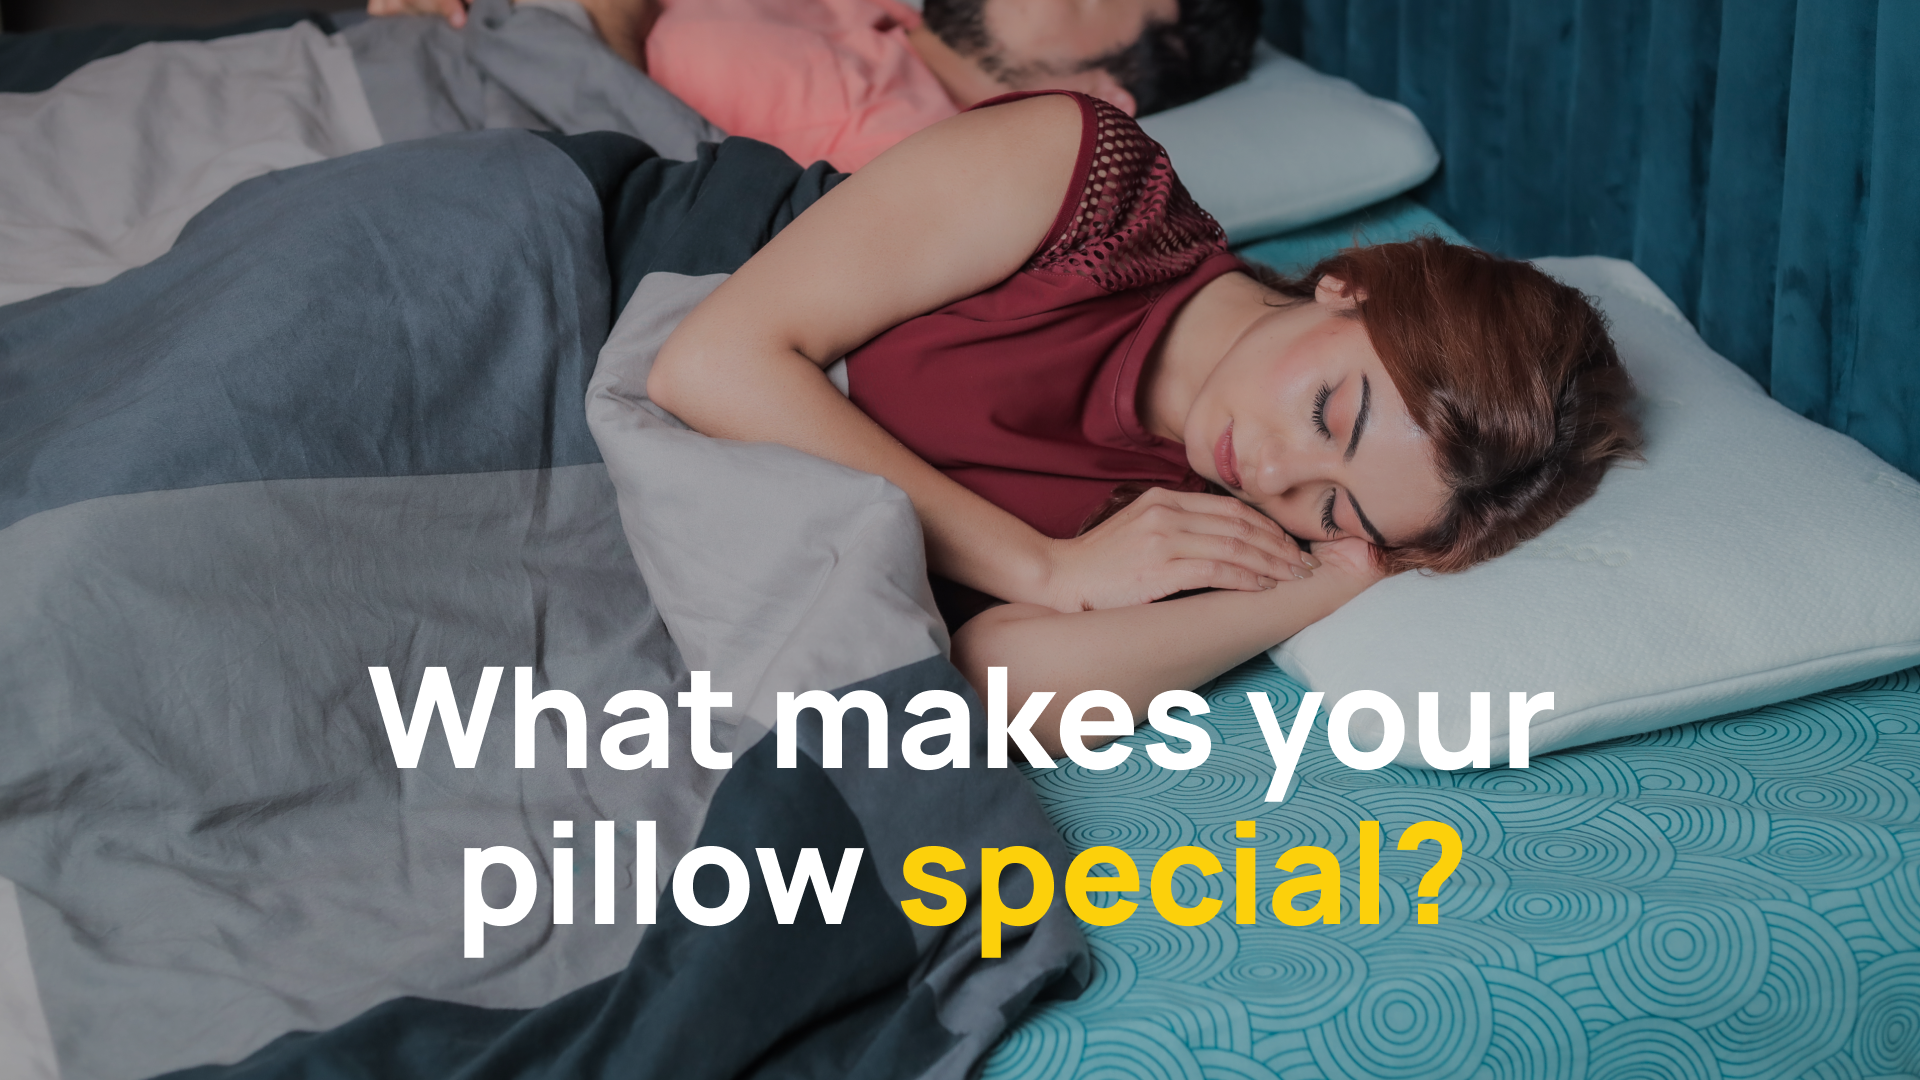 WHAT MAKES YOUR PILLOW SPECIAL?